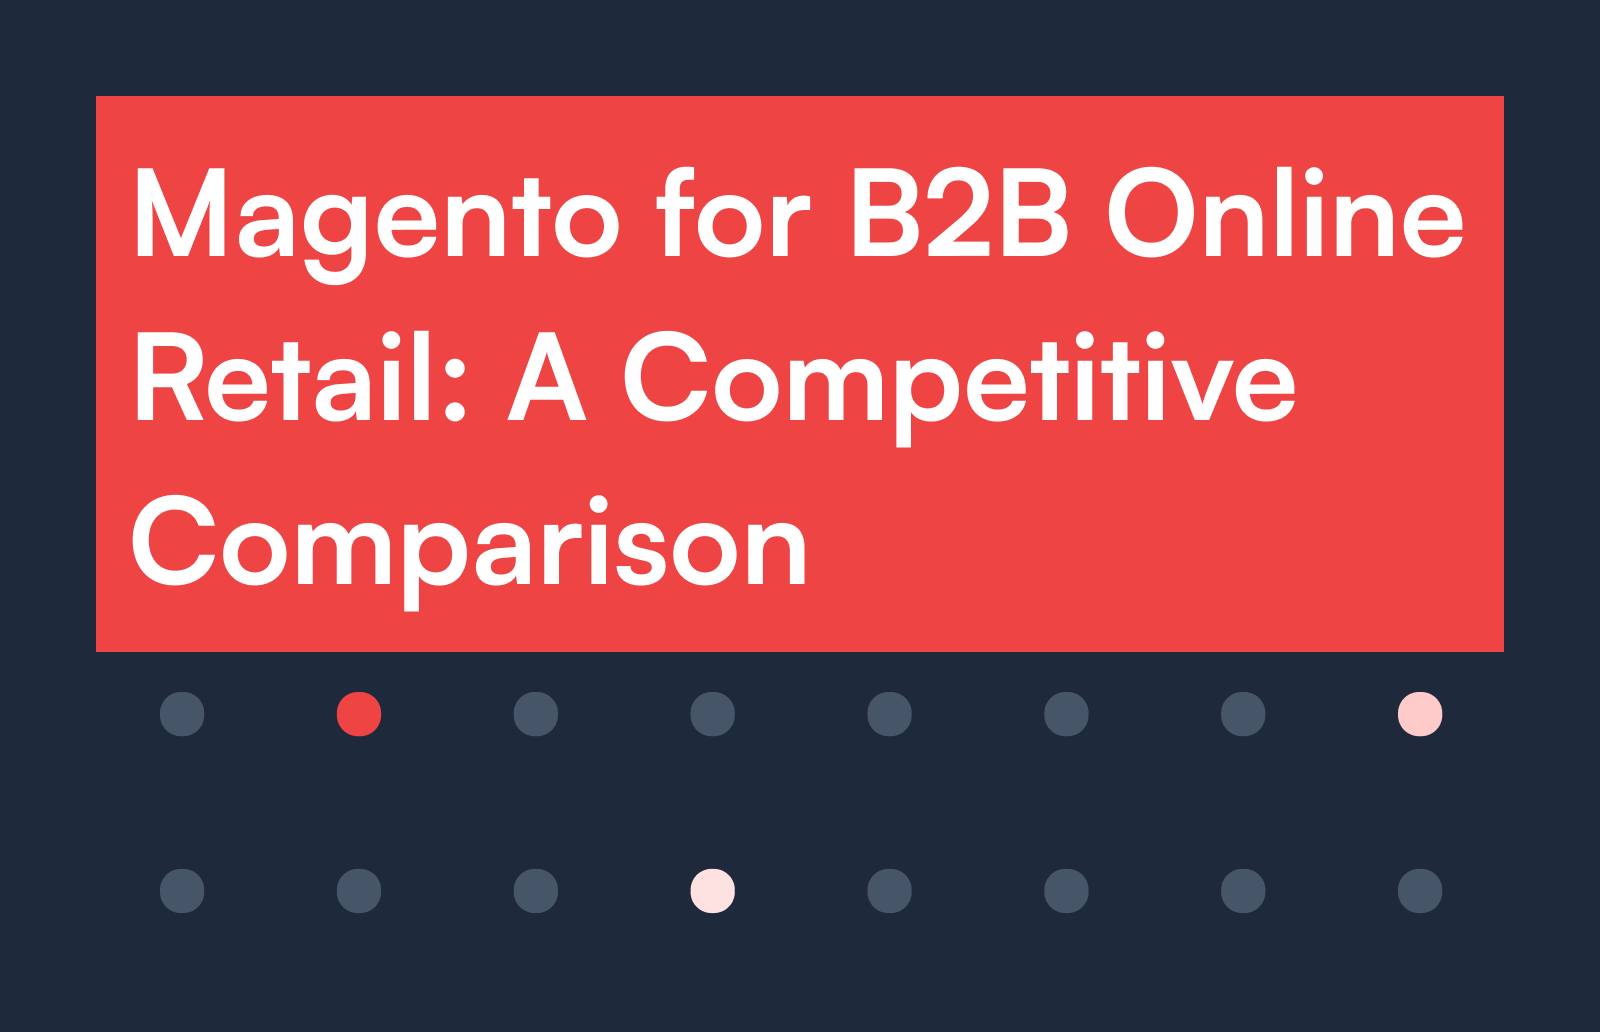 Magento for B2B Online Retail: A Competitive Comparison